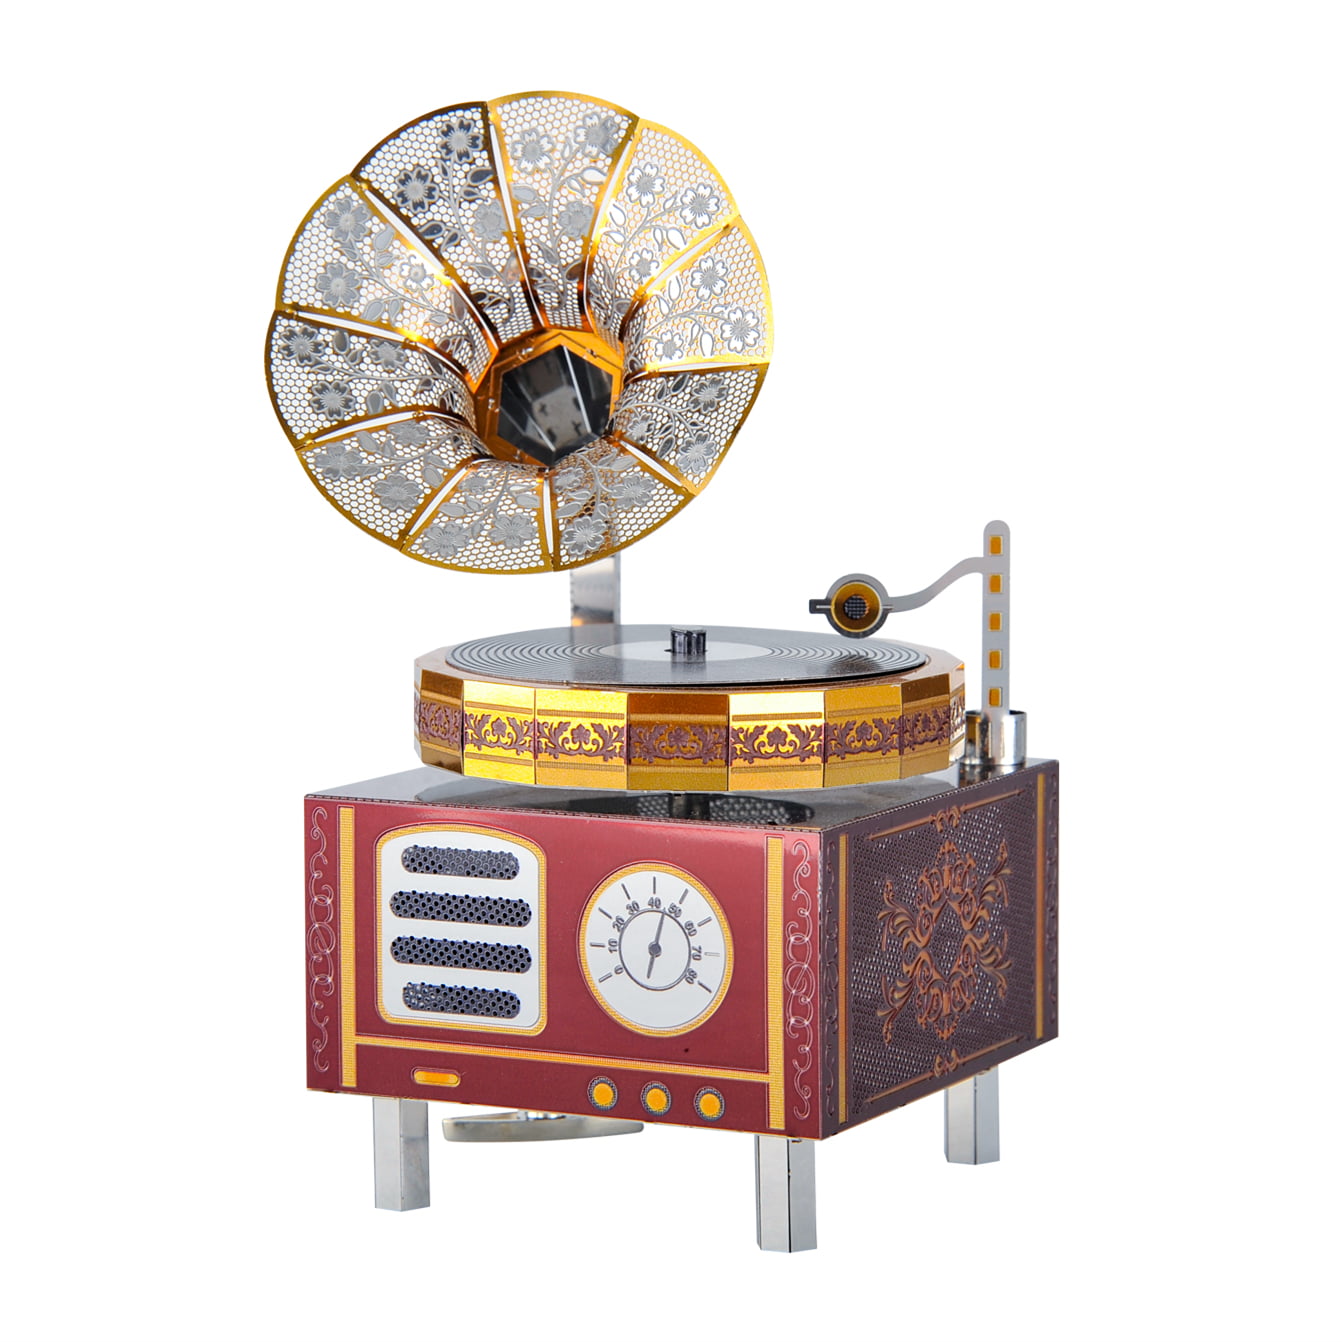 Little Star Microworld 3D Metal Puzzle Jigsaw Model Building Windmill Music Box DIY Gifts 